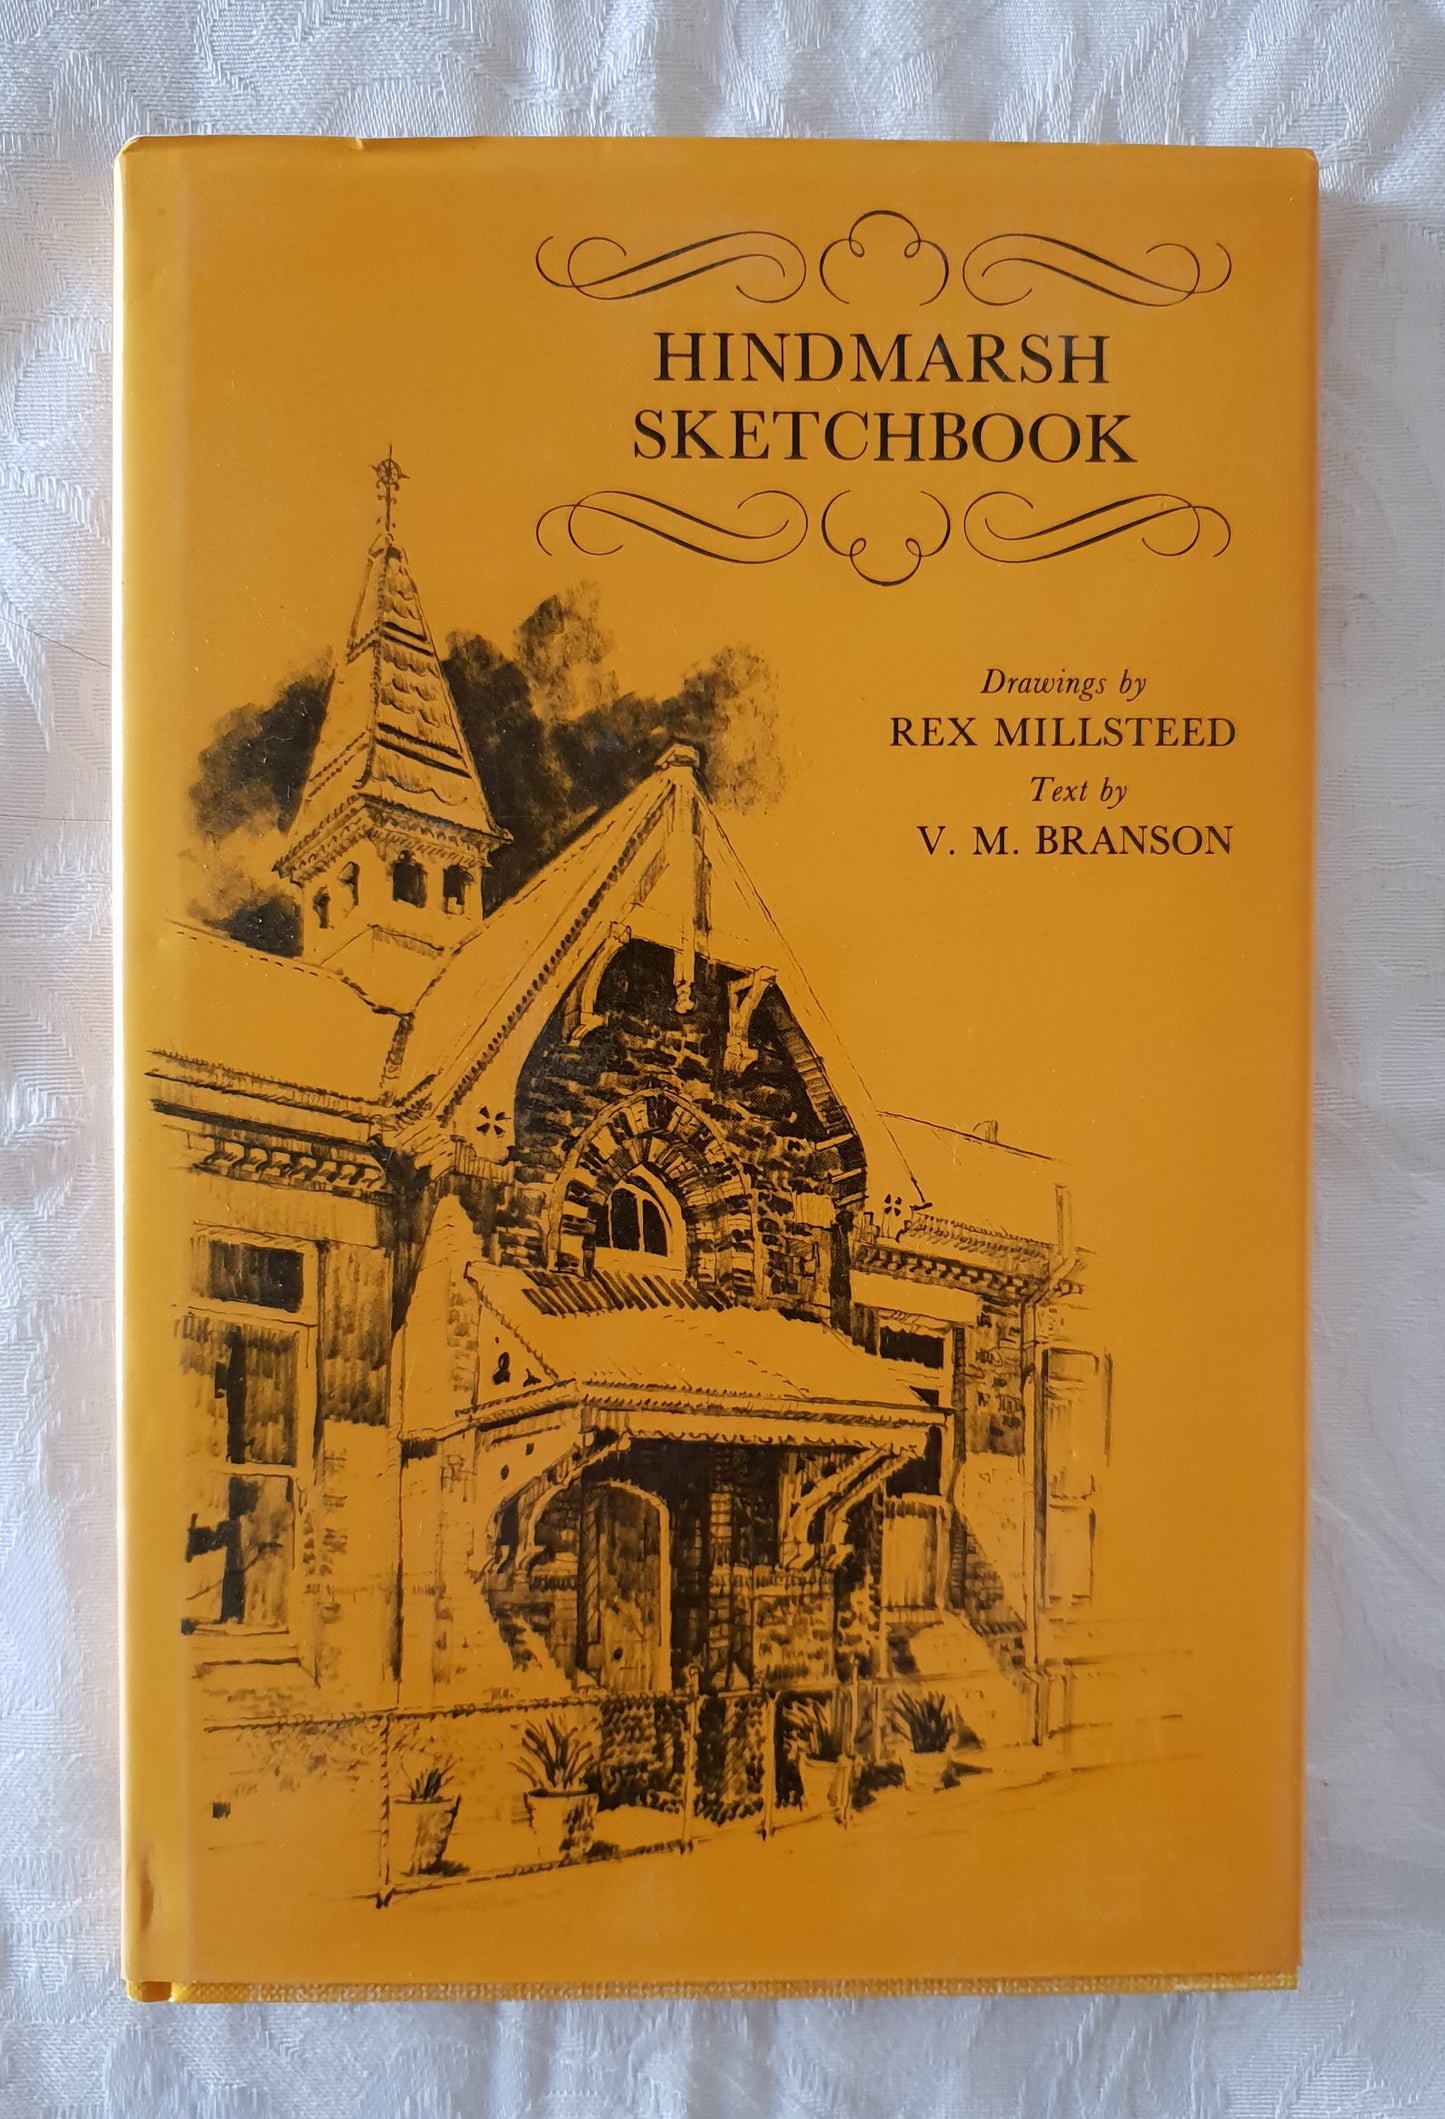 Hindmarsh Sketchbook  Drawings by Rex Millsteed and Text by V. M. Branson